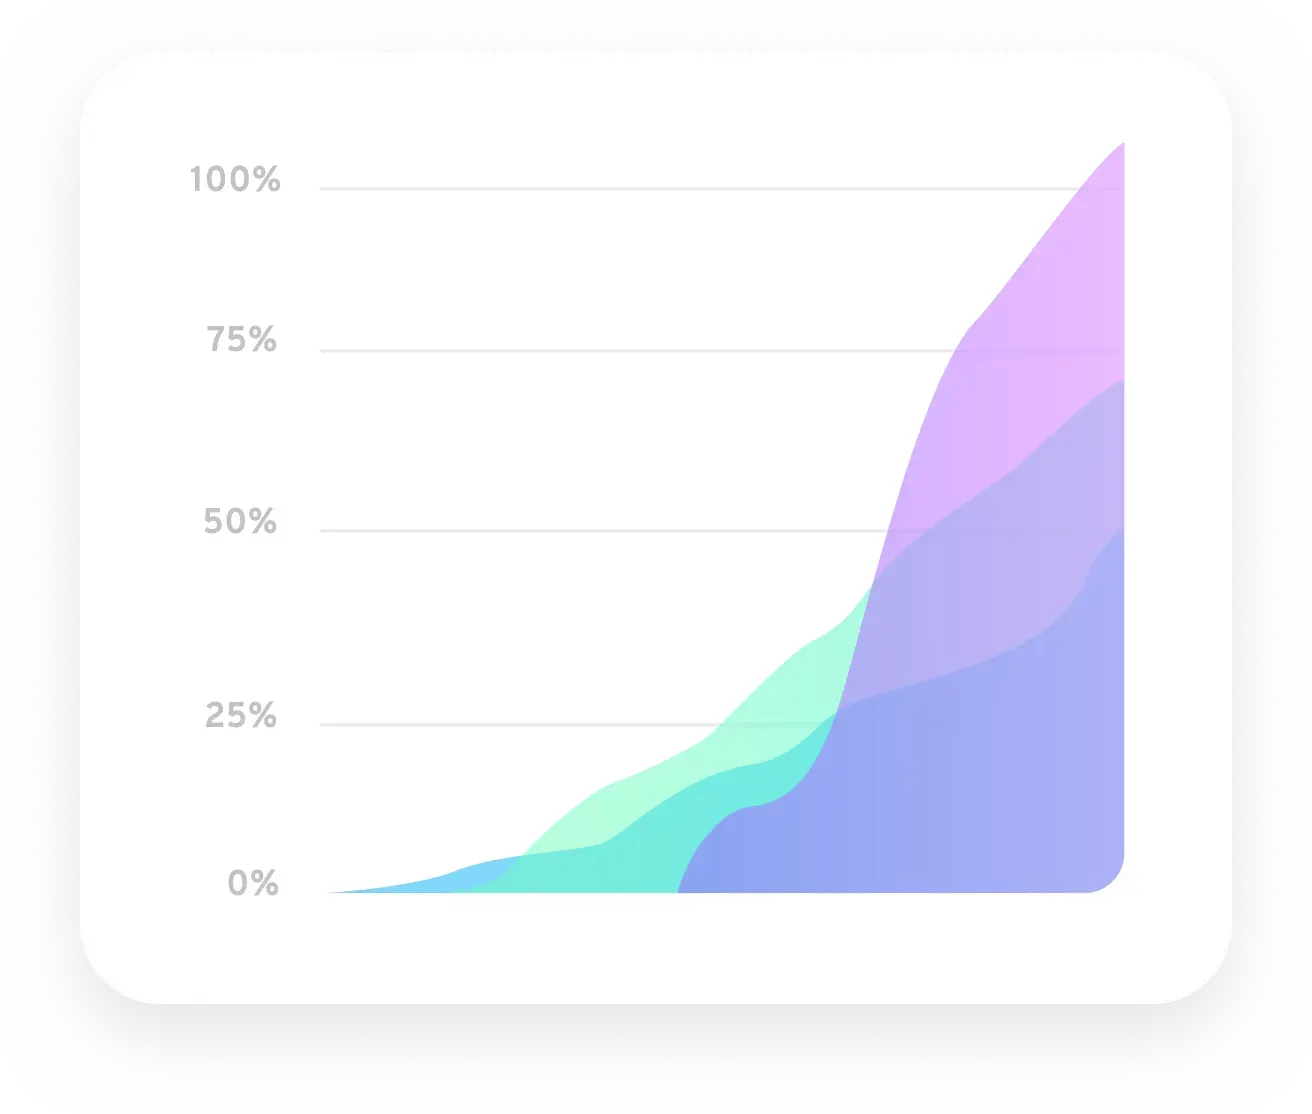 Lead Generation Graph With Increased Results